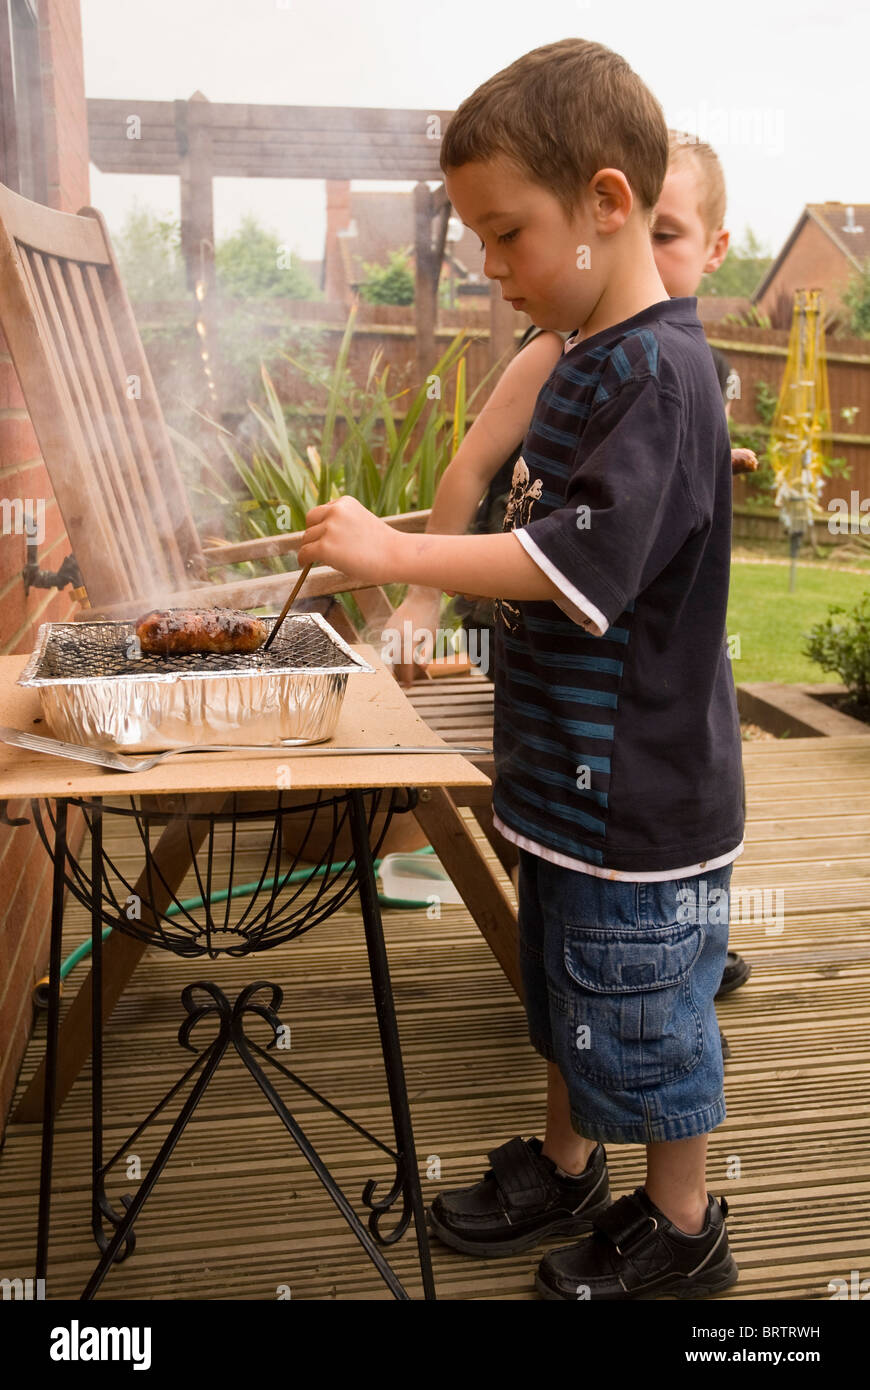 A child cooking on a disposable barbecue Stock Photo